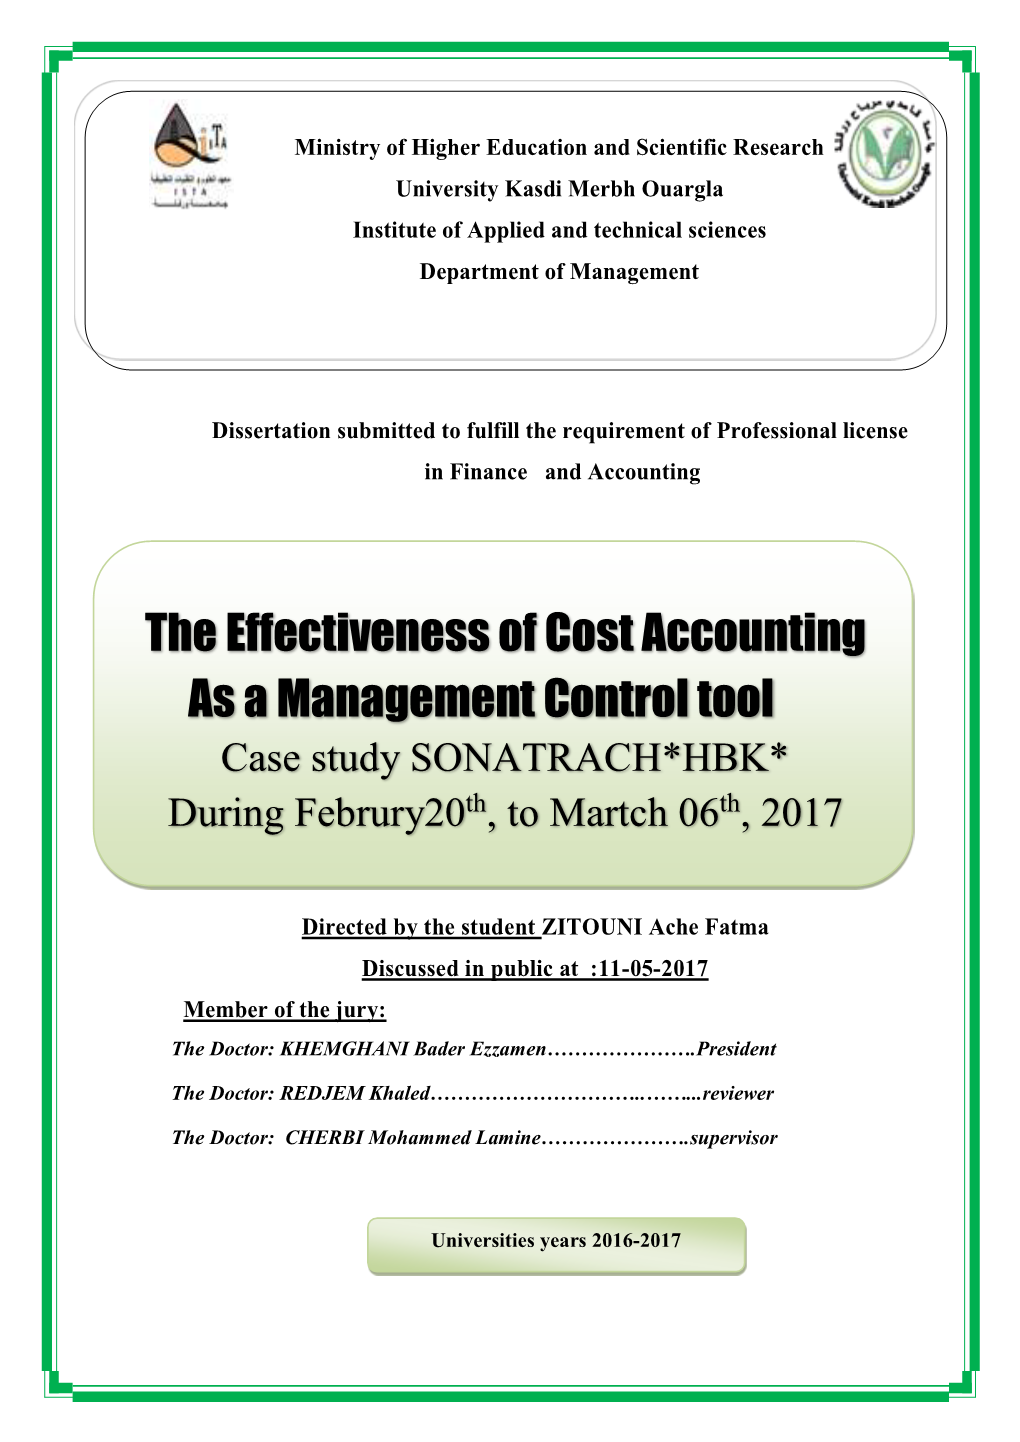 The Effectiveness of Cost Accounting As a Management Control Tool